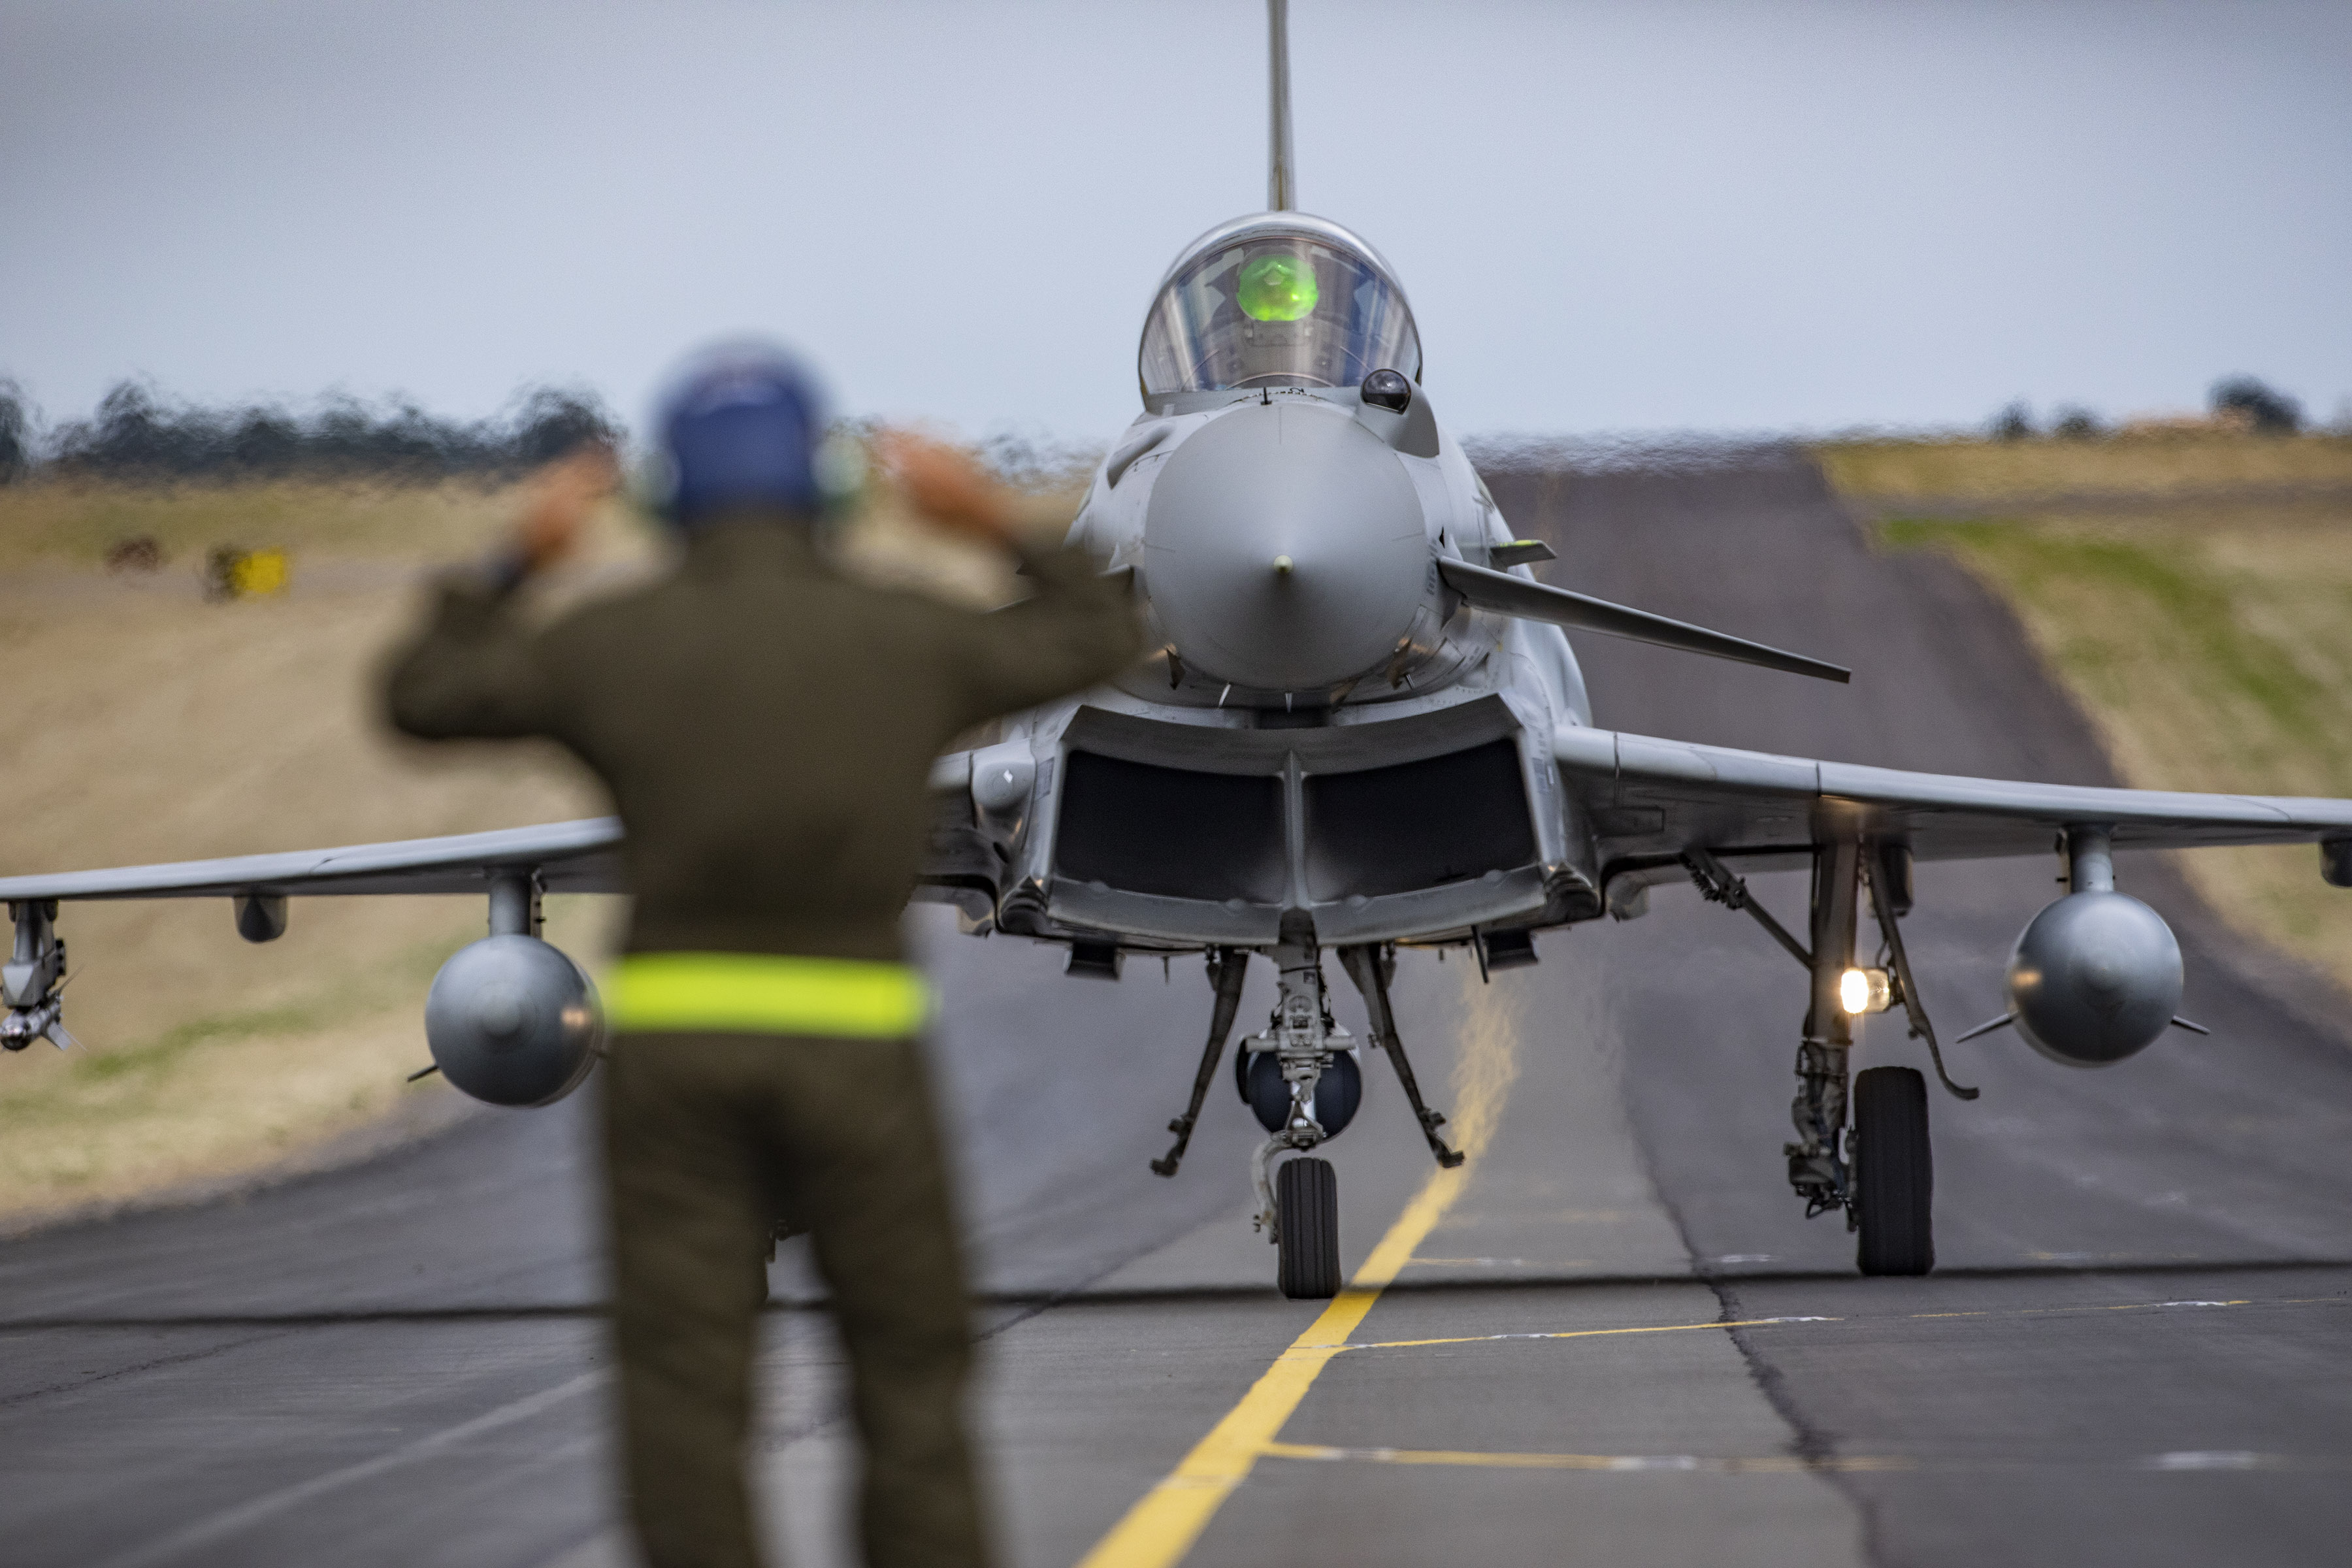 Image shows RAF aviators guiding aircraft on the runway.